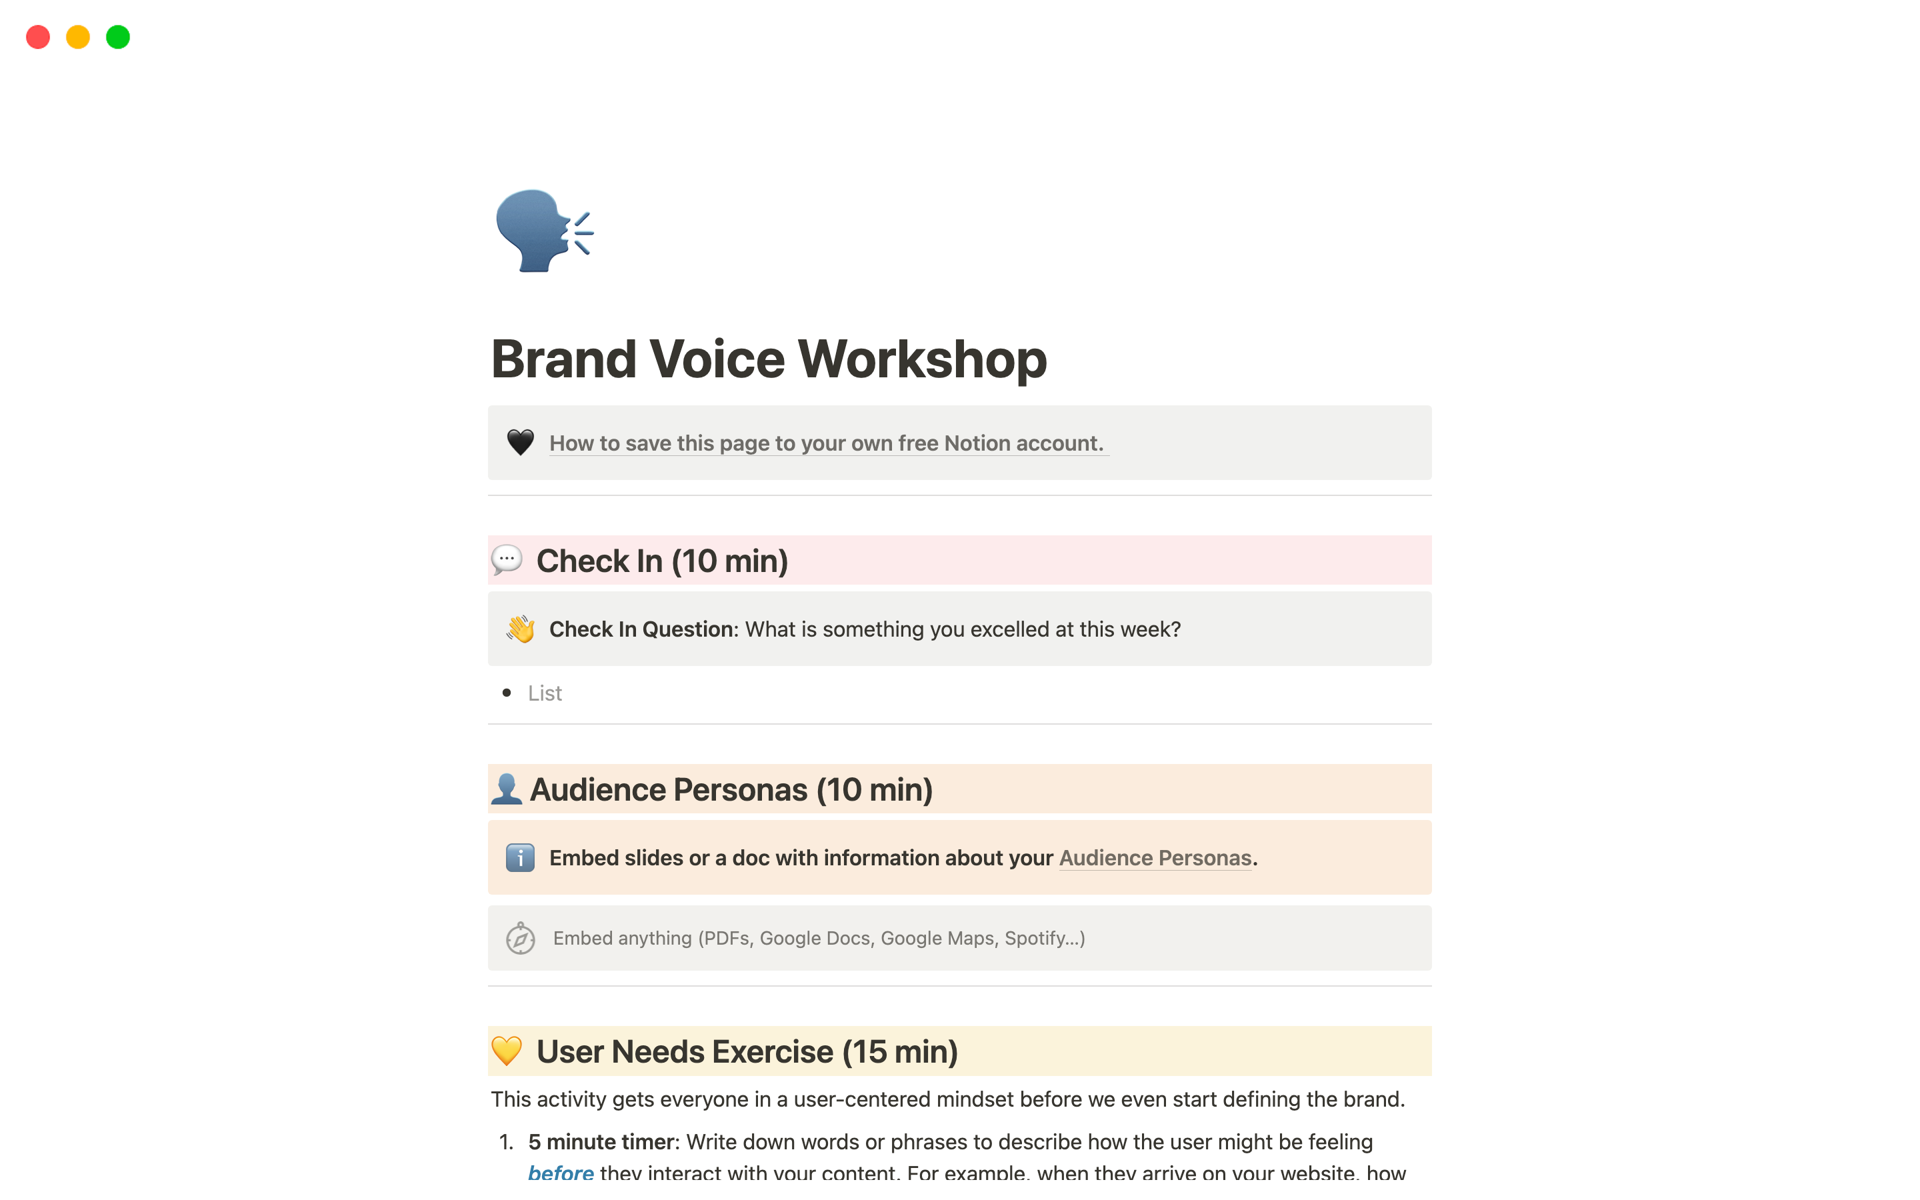 Work collaboratively with your team in this one-hour workshop to define a strong, authentic brand voice that sets your organization apart.